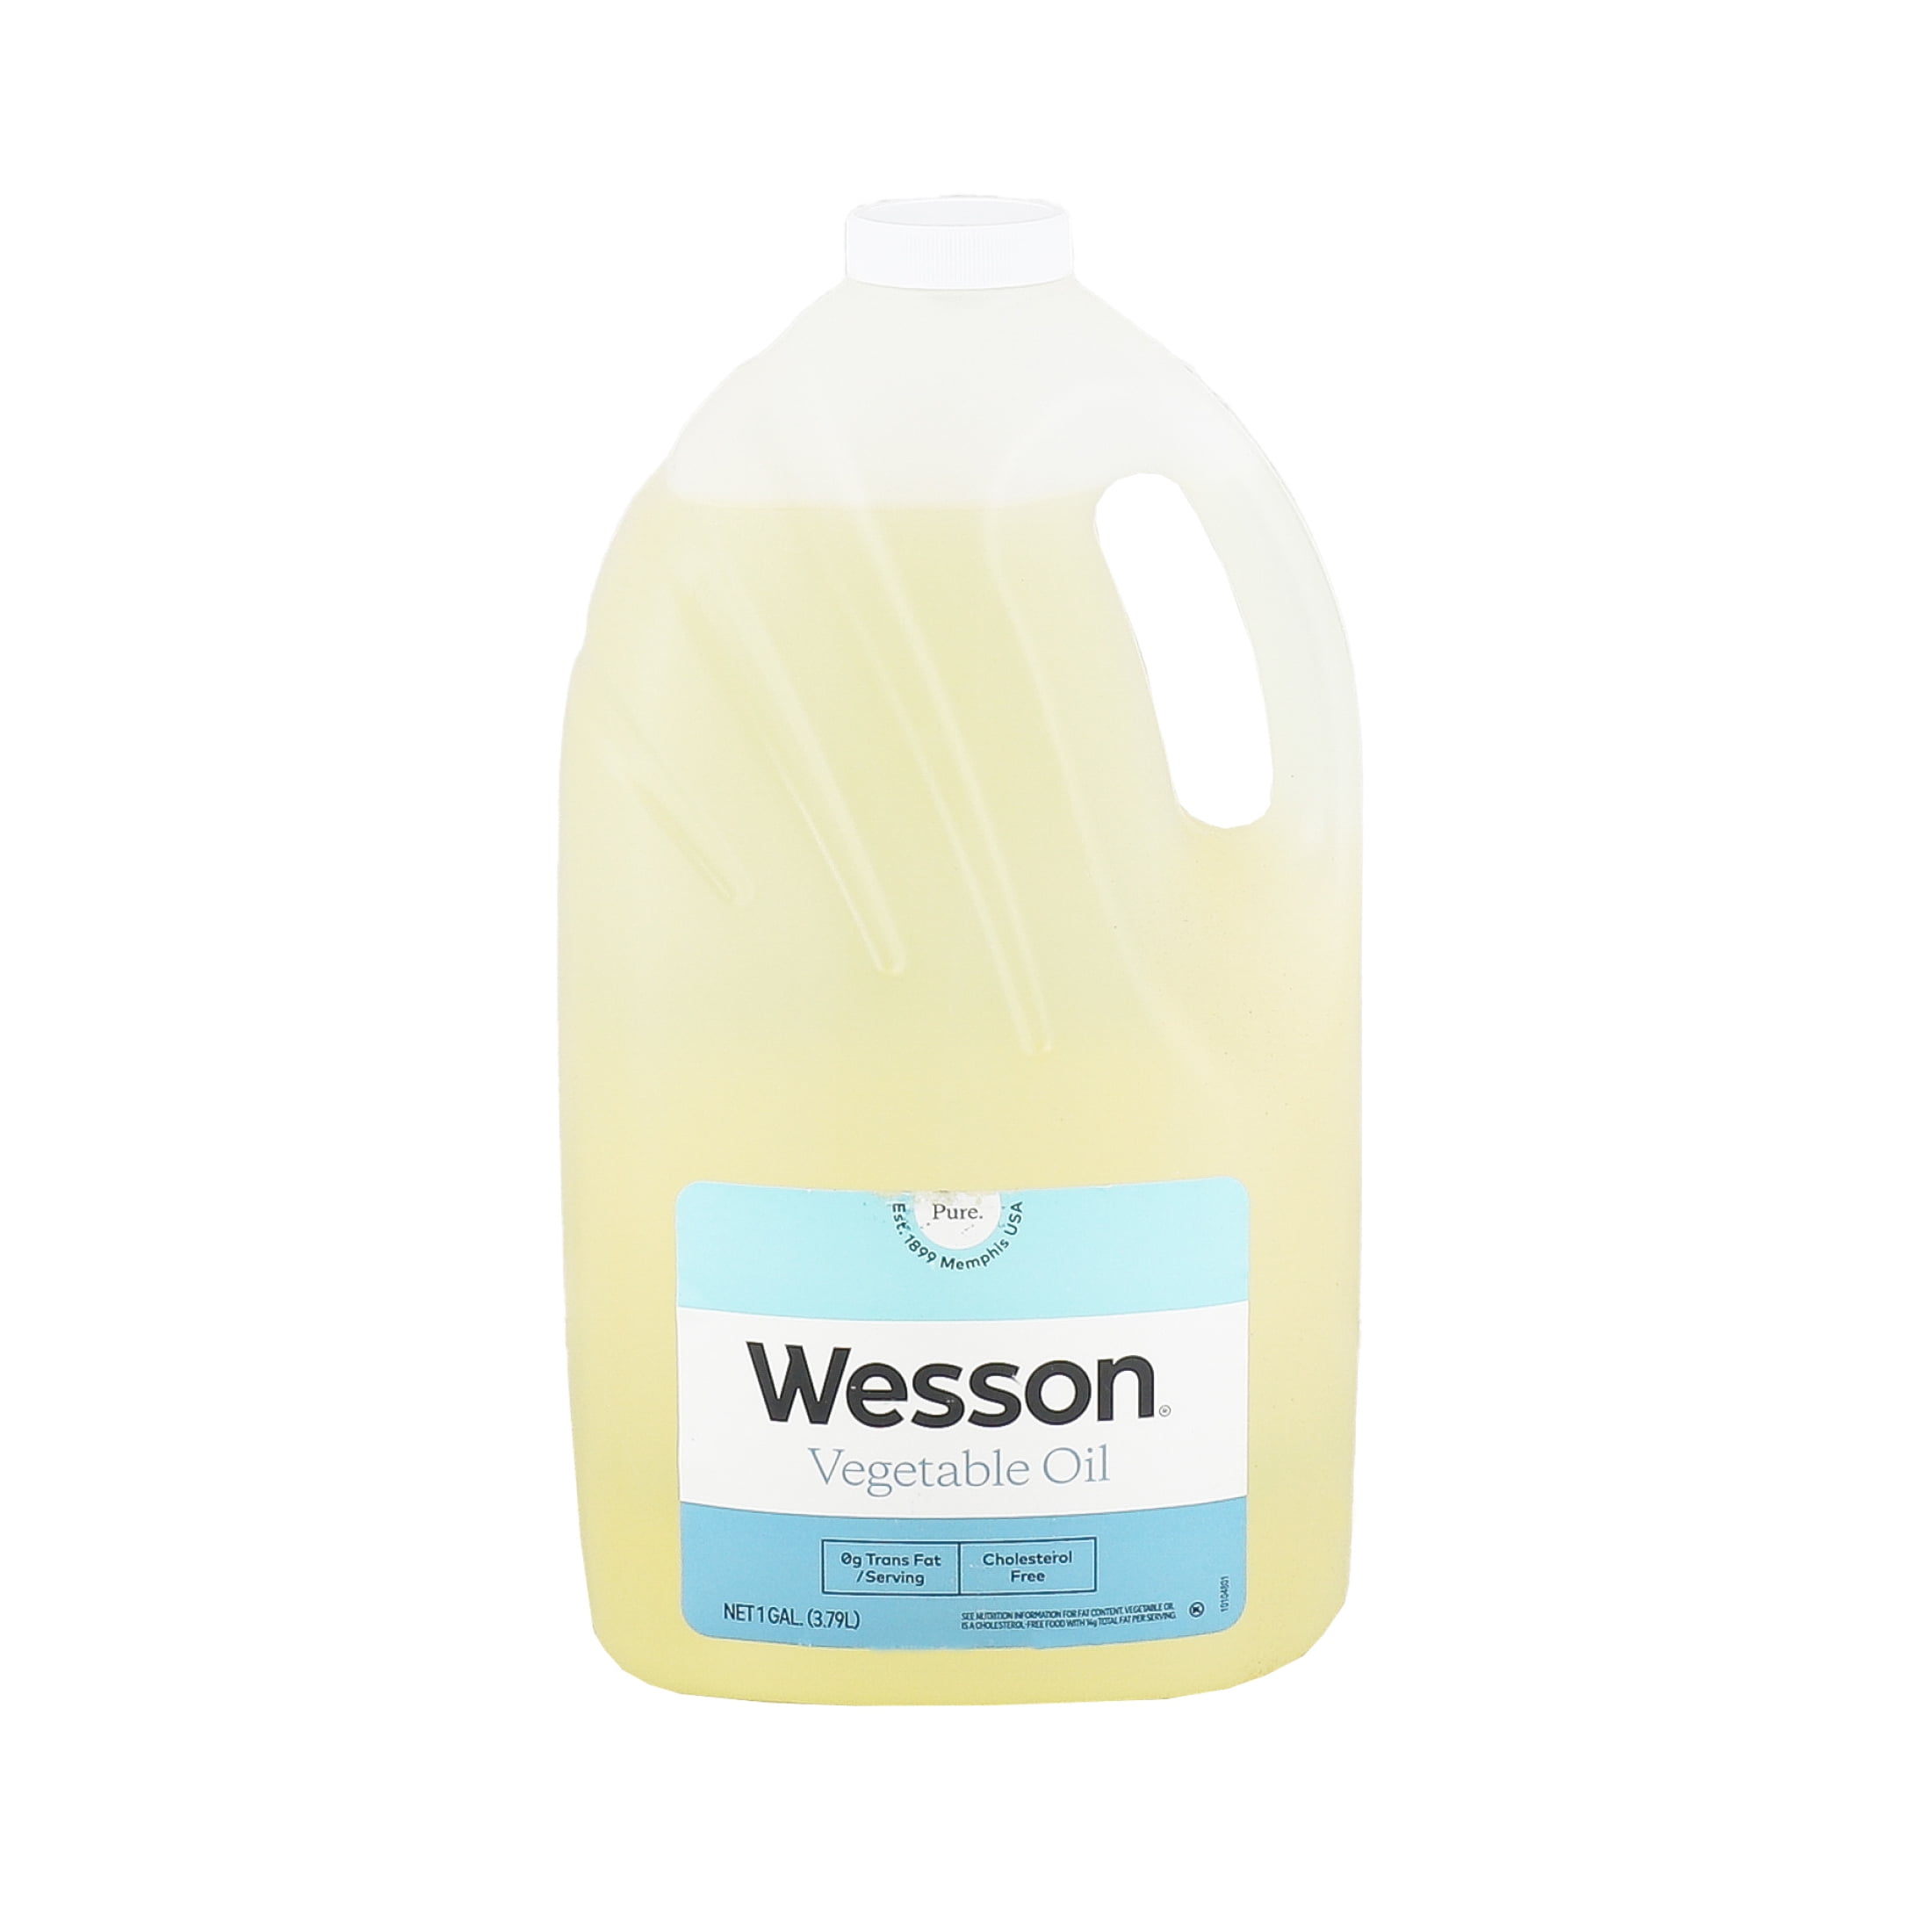 Wesson Pure & Cholesterol Free Soybean Vegetable Oil, 128 fl oz